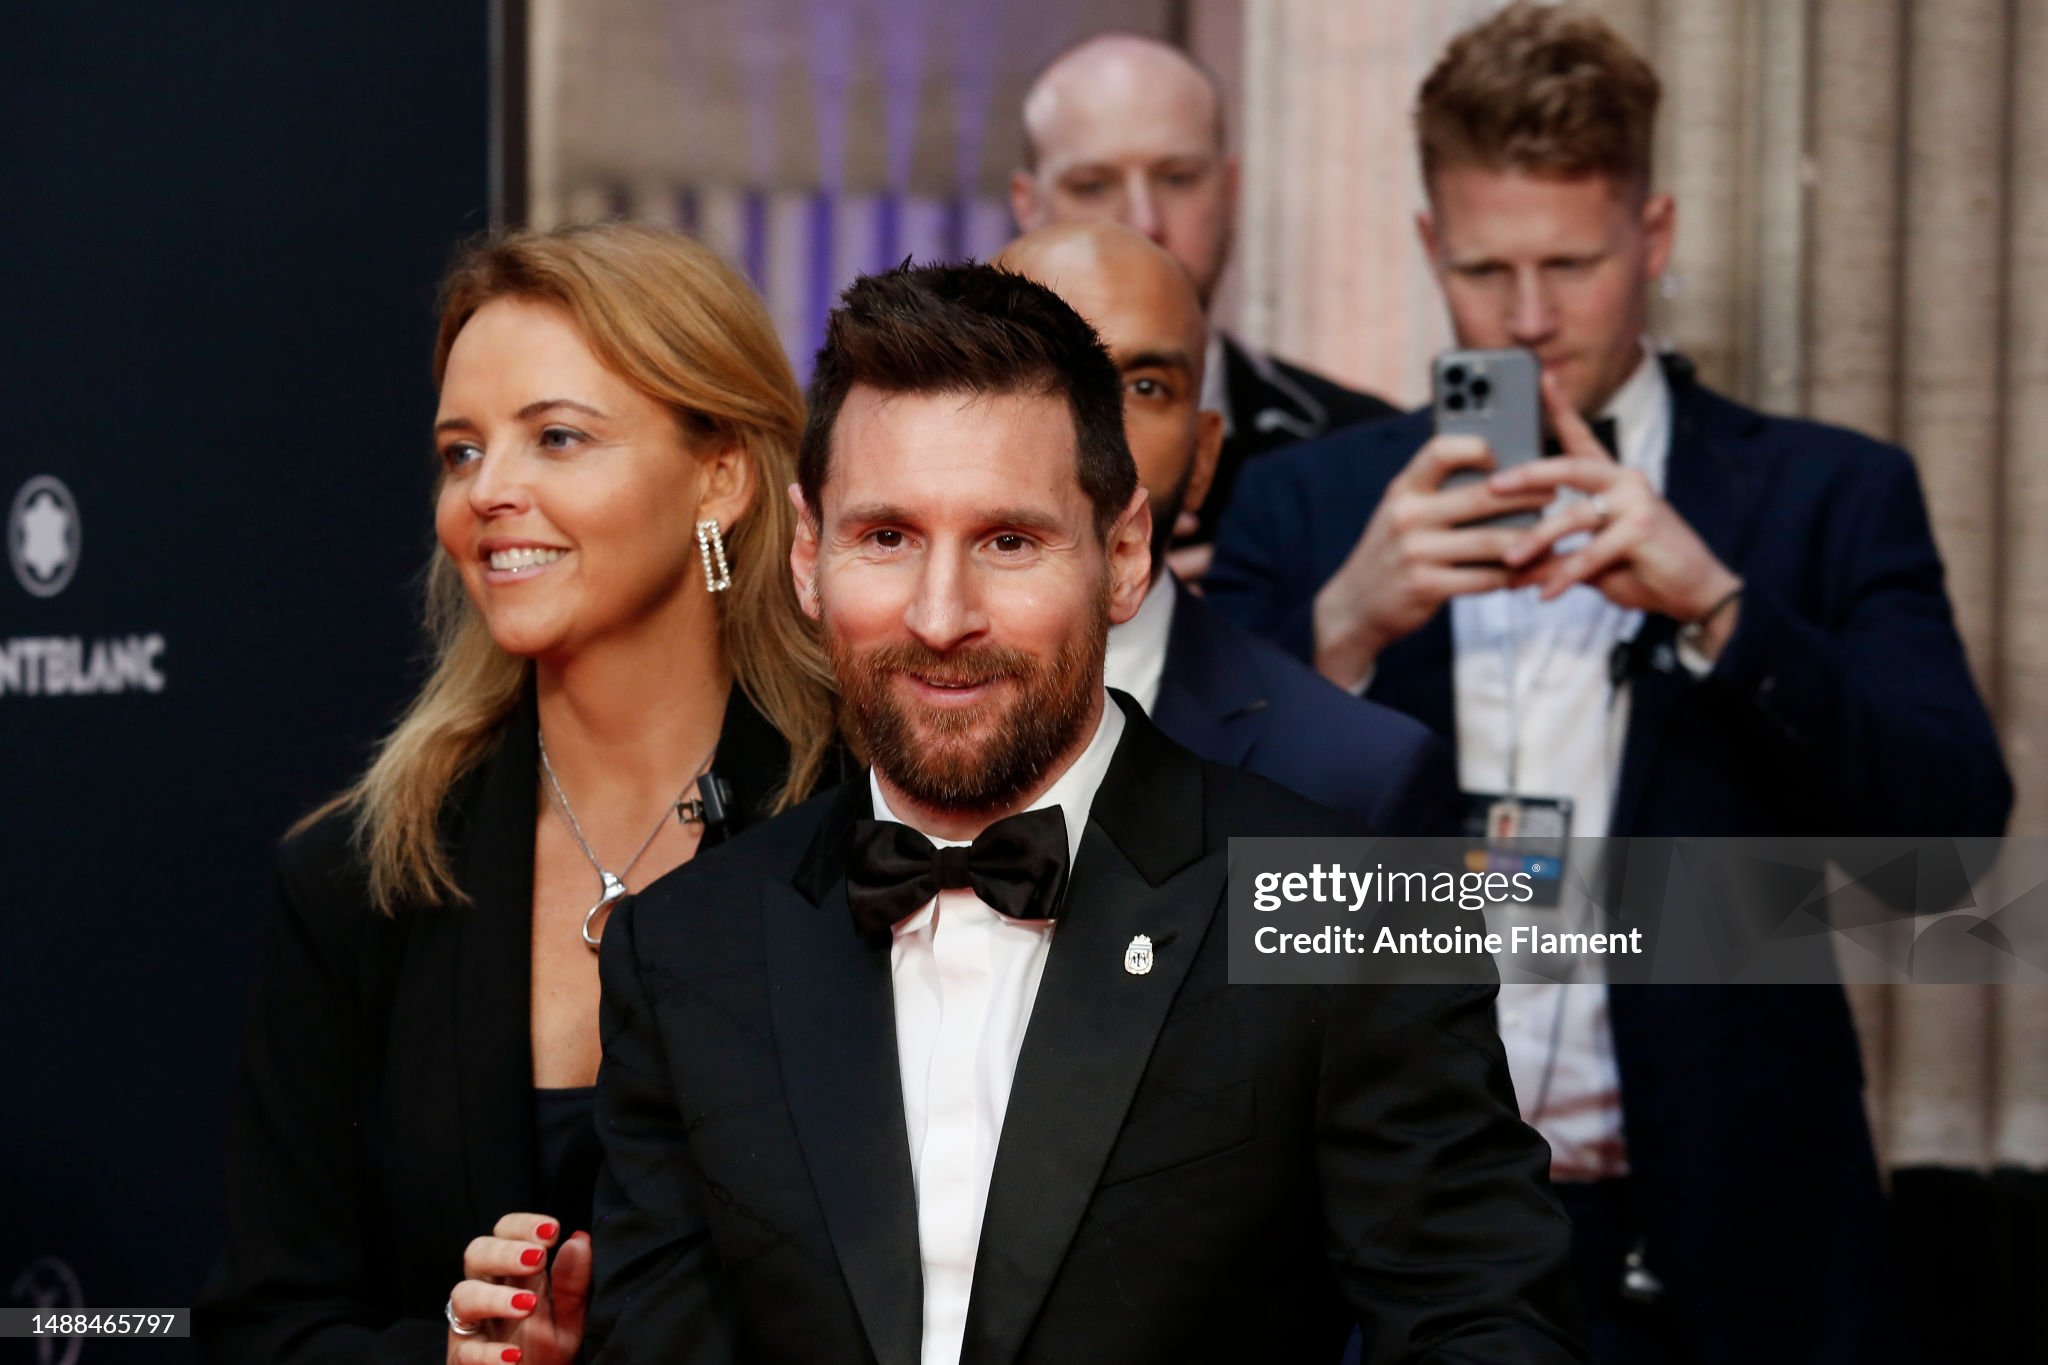 Messi: 'I have been able to fulfill my dream'